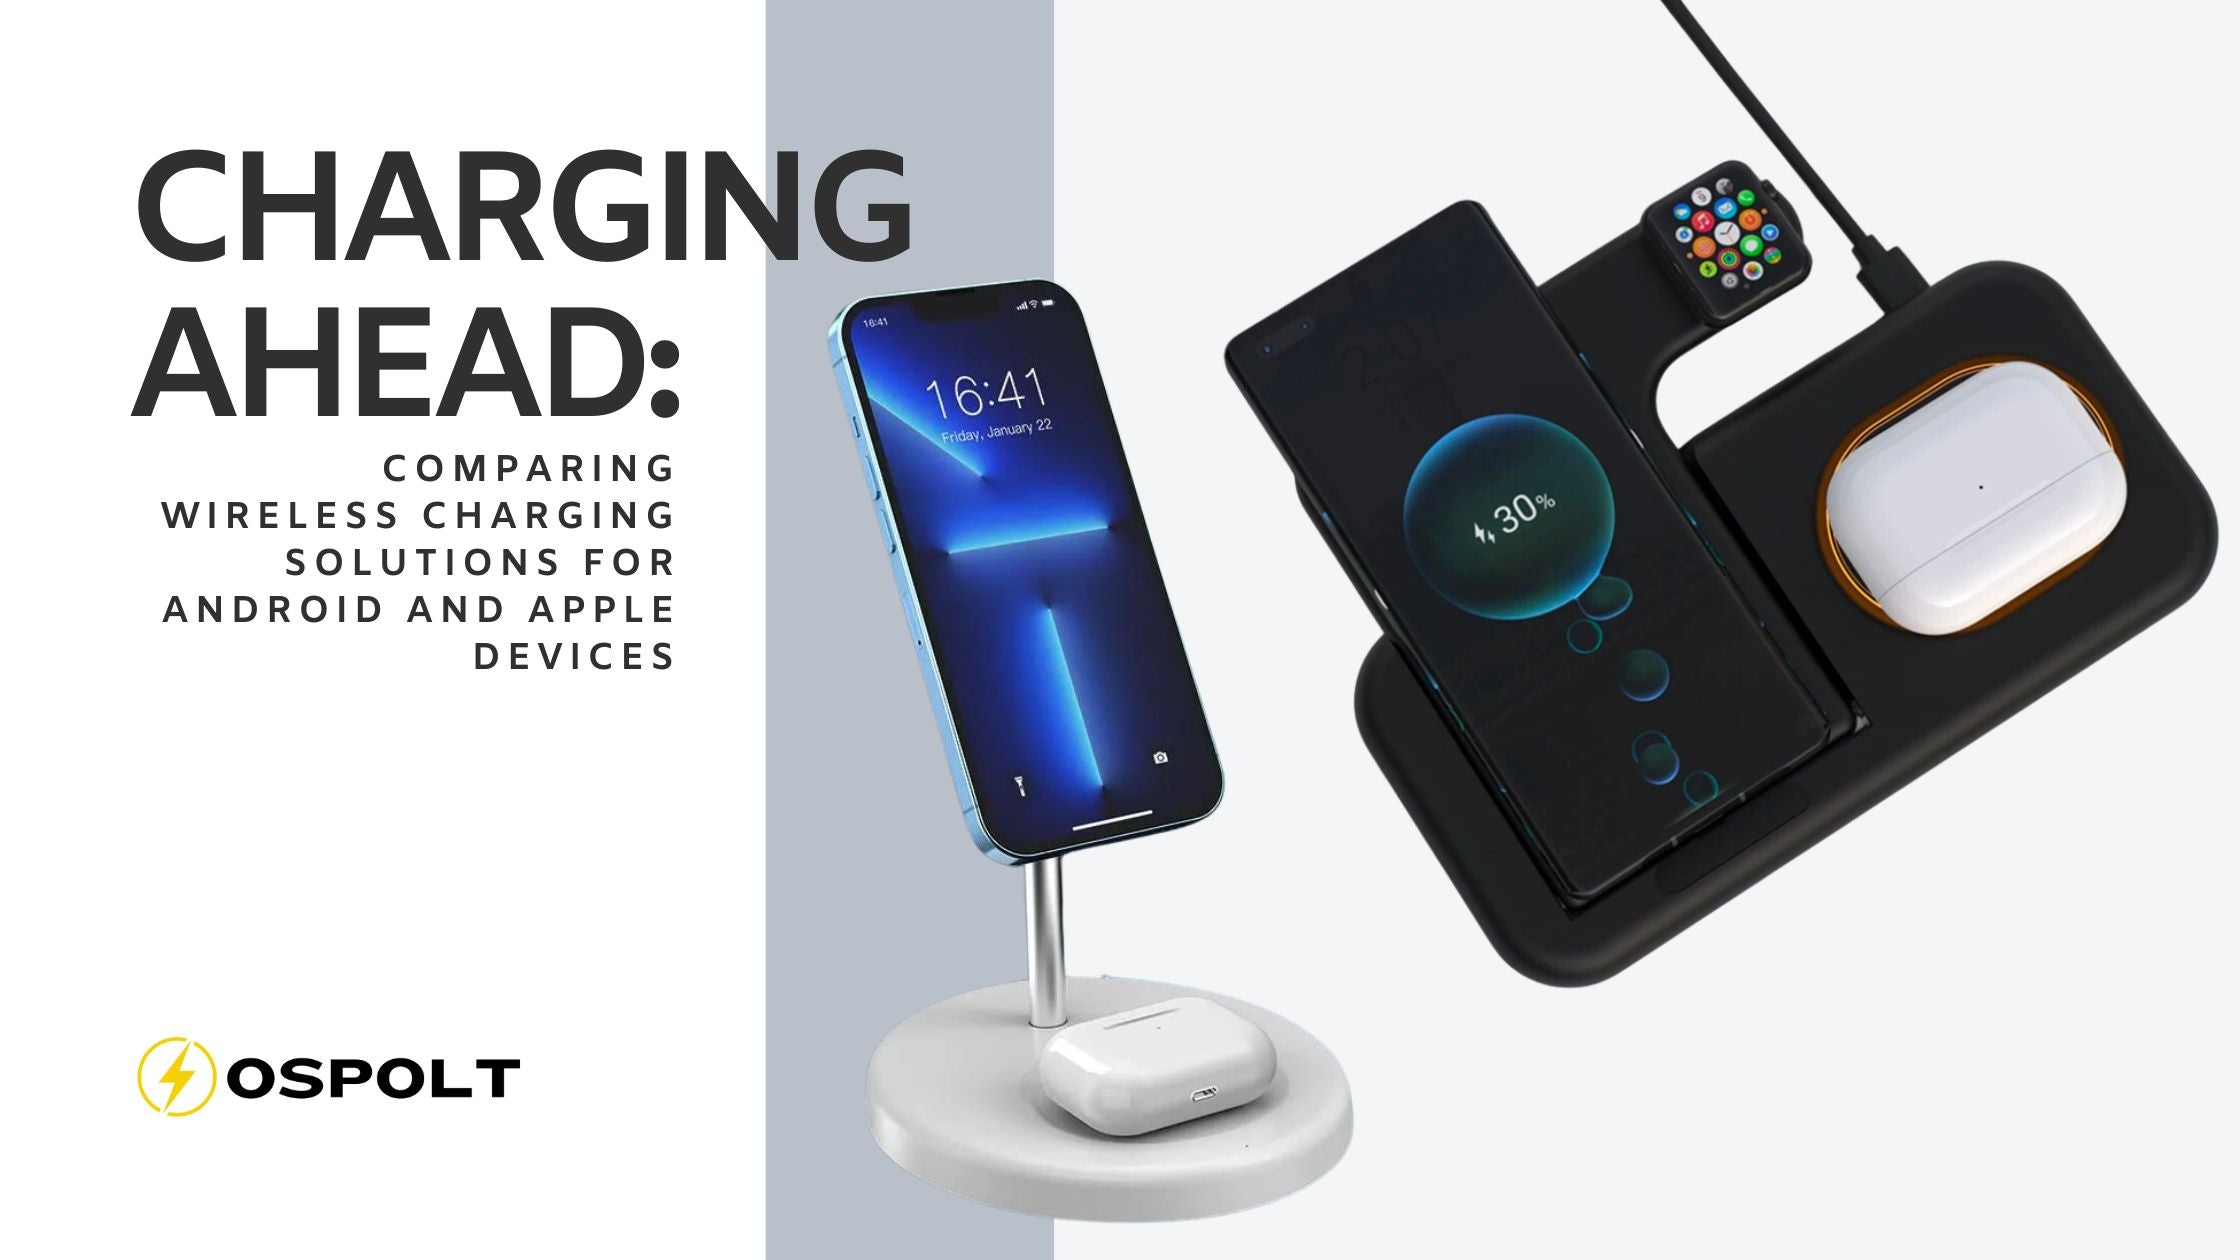 Comparing Wireless Charging Solutions for Android and Apple Devices